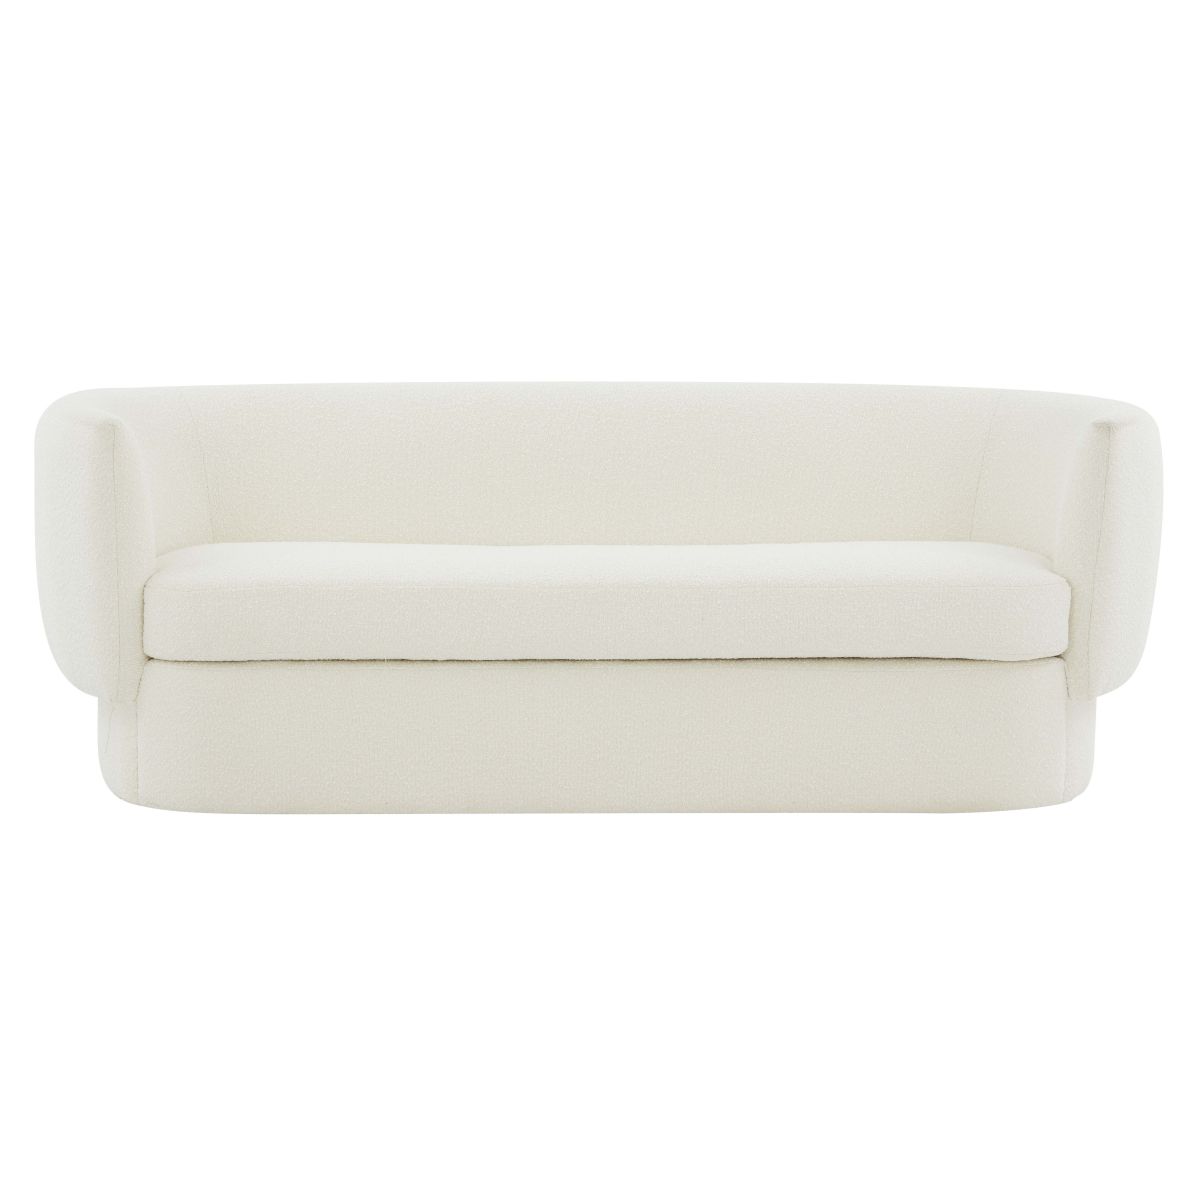 Safavieh Couture Mariano Curved Sofa